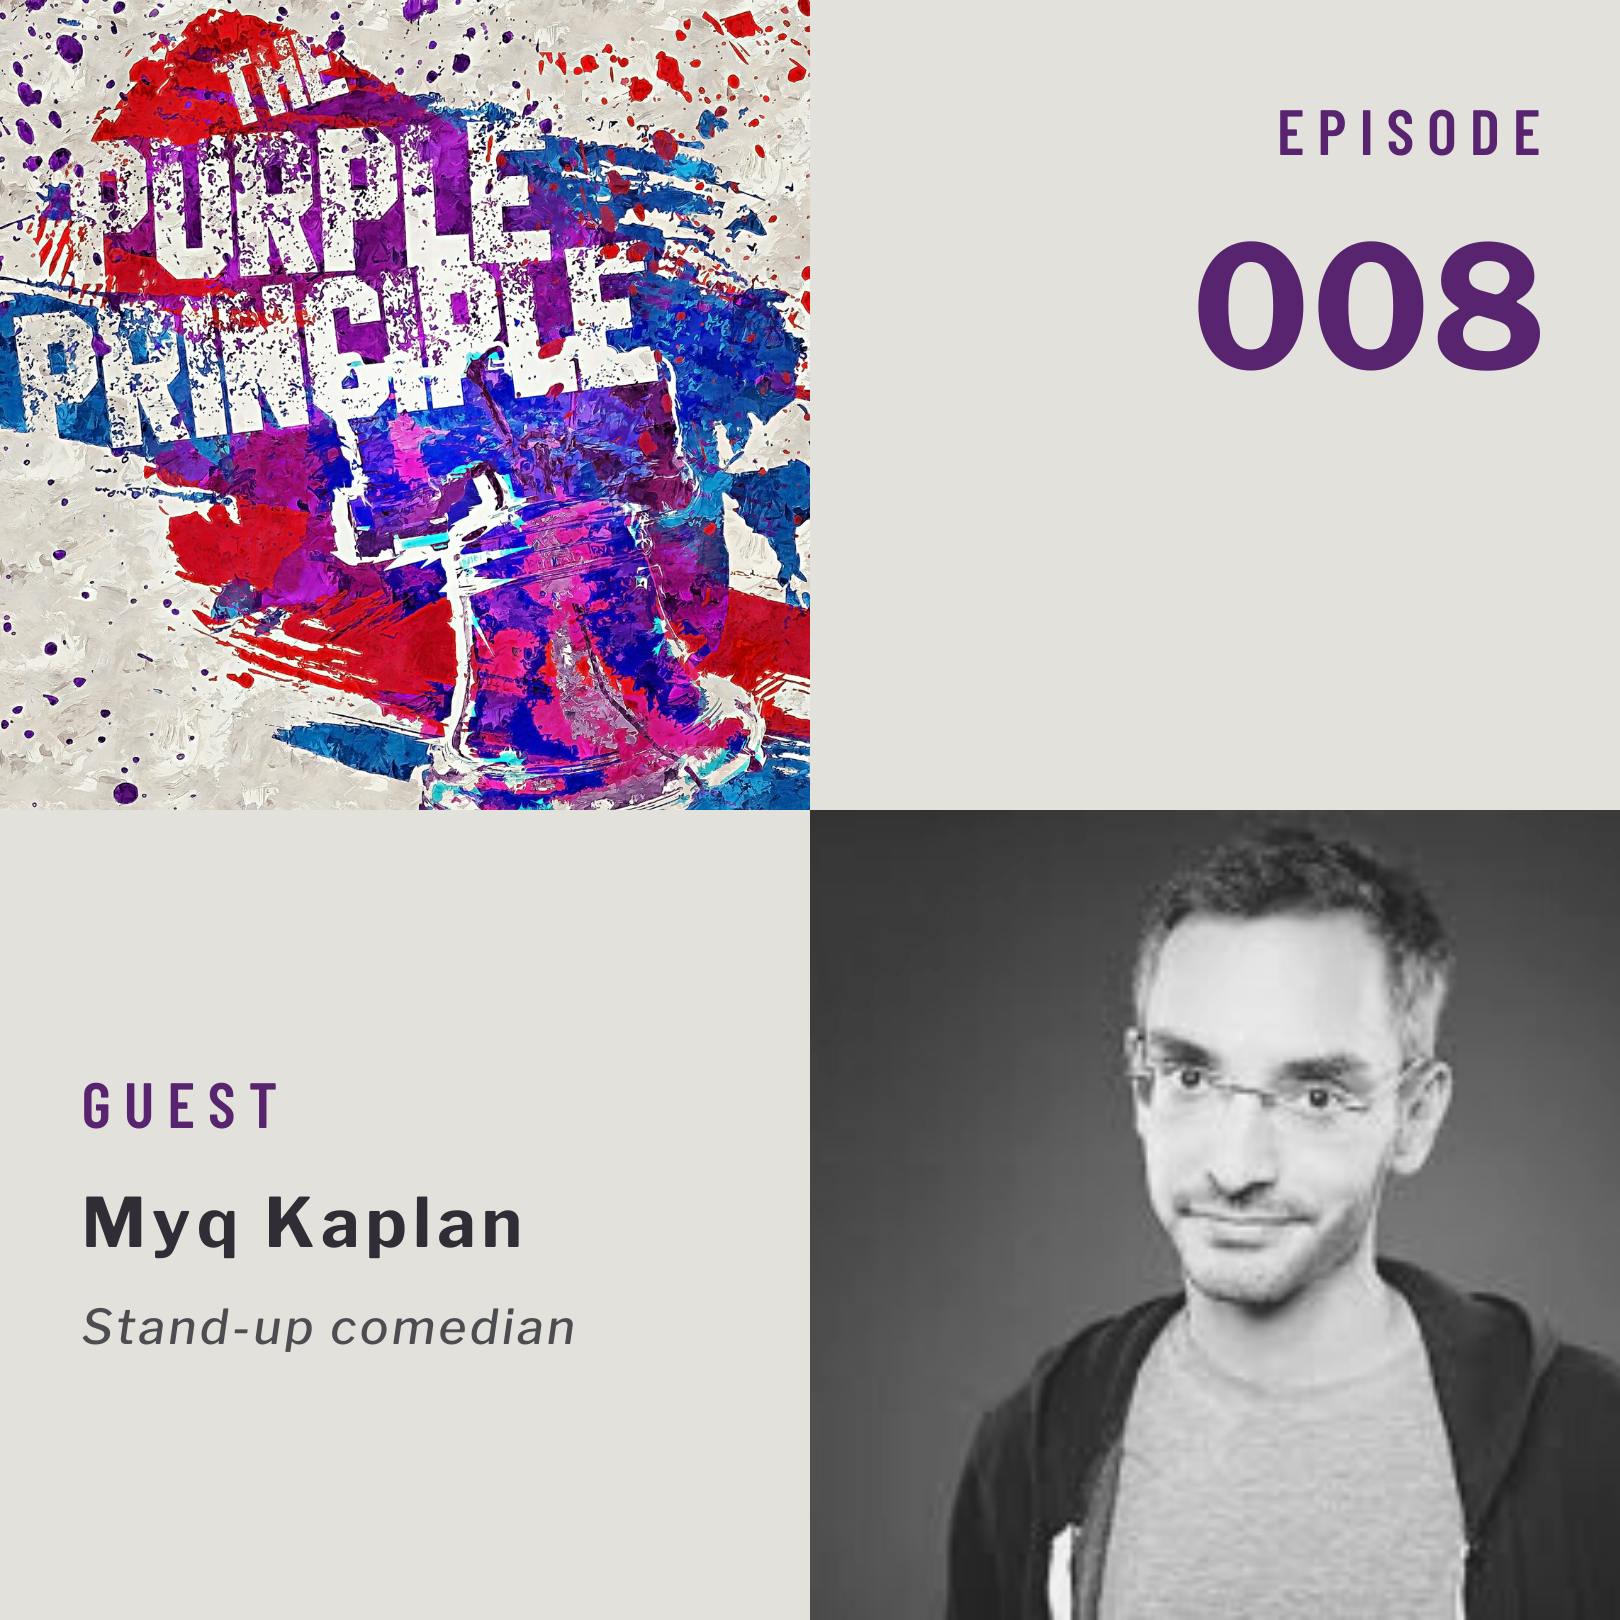 Comedy & Partisanship: The Transcendent Laugh with Special Guest, Myq Kaplan